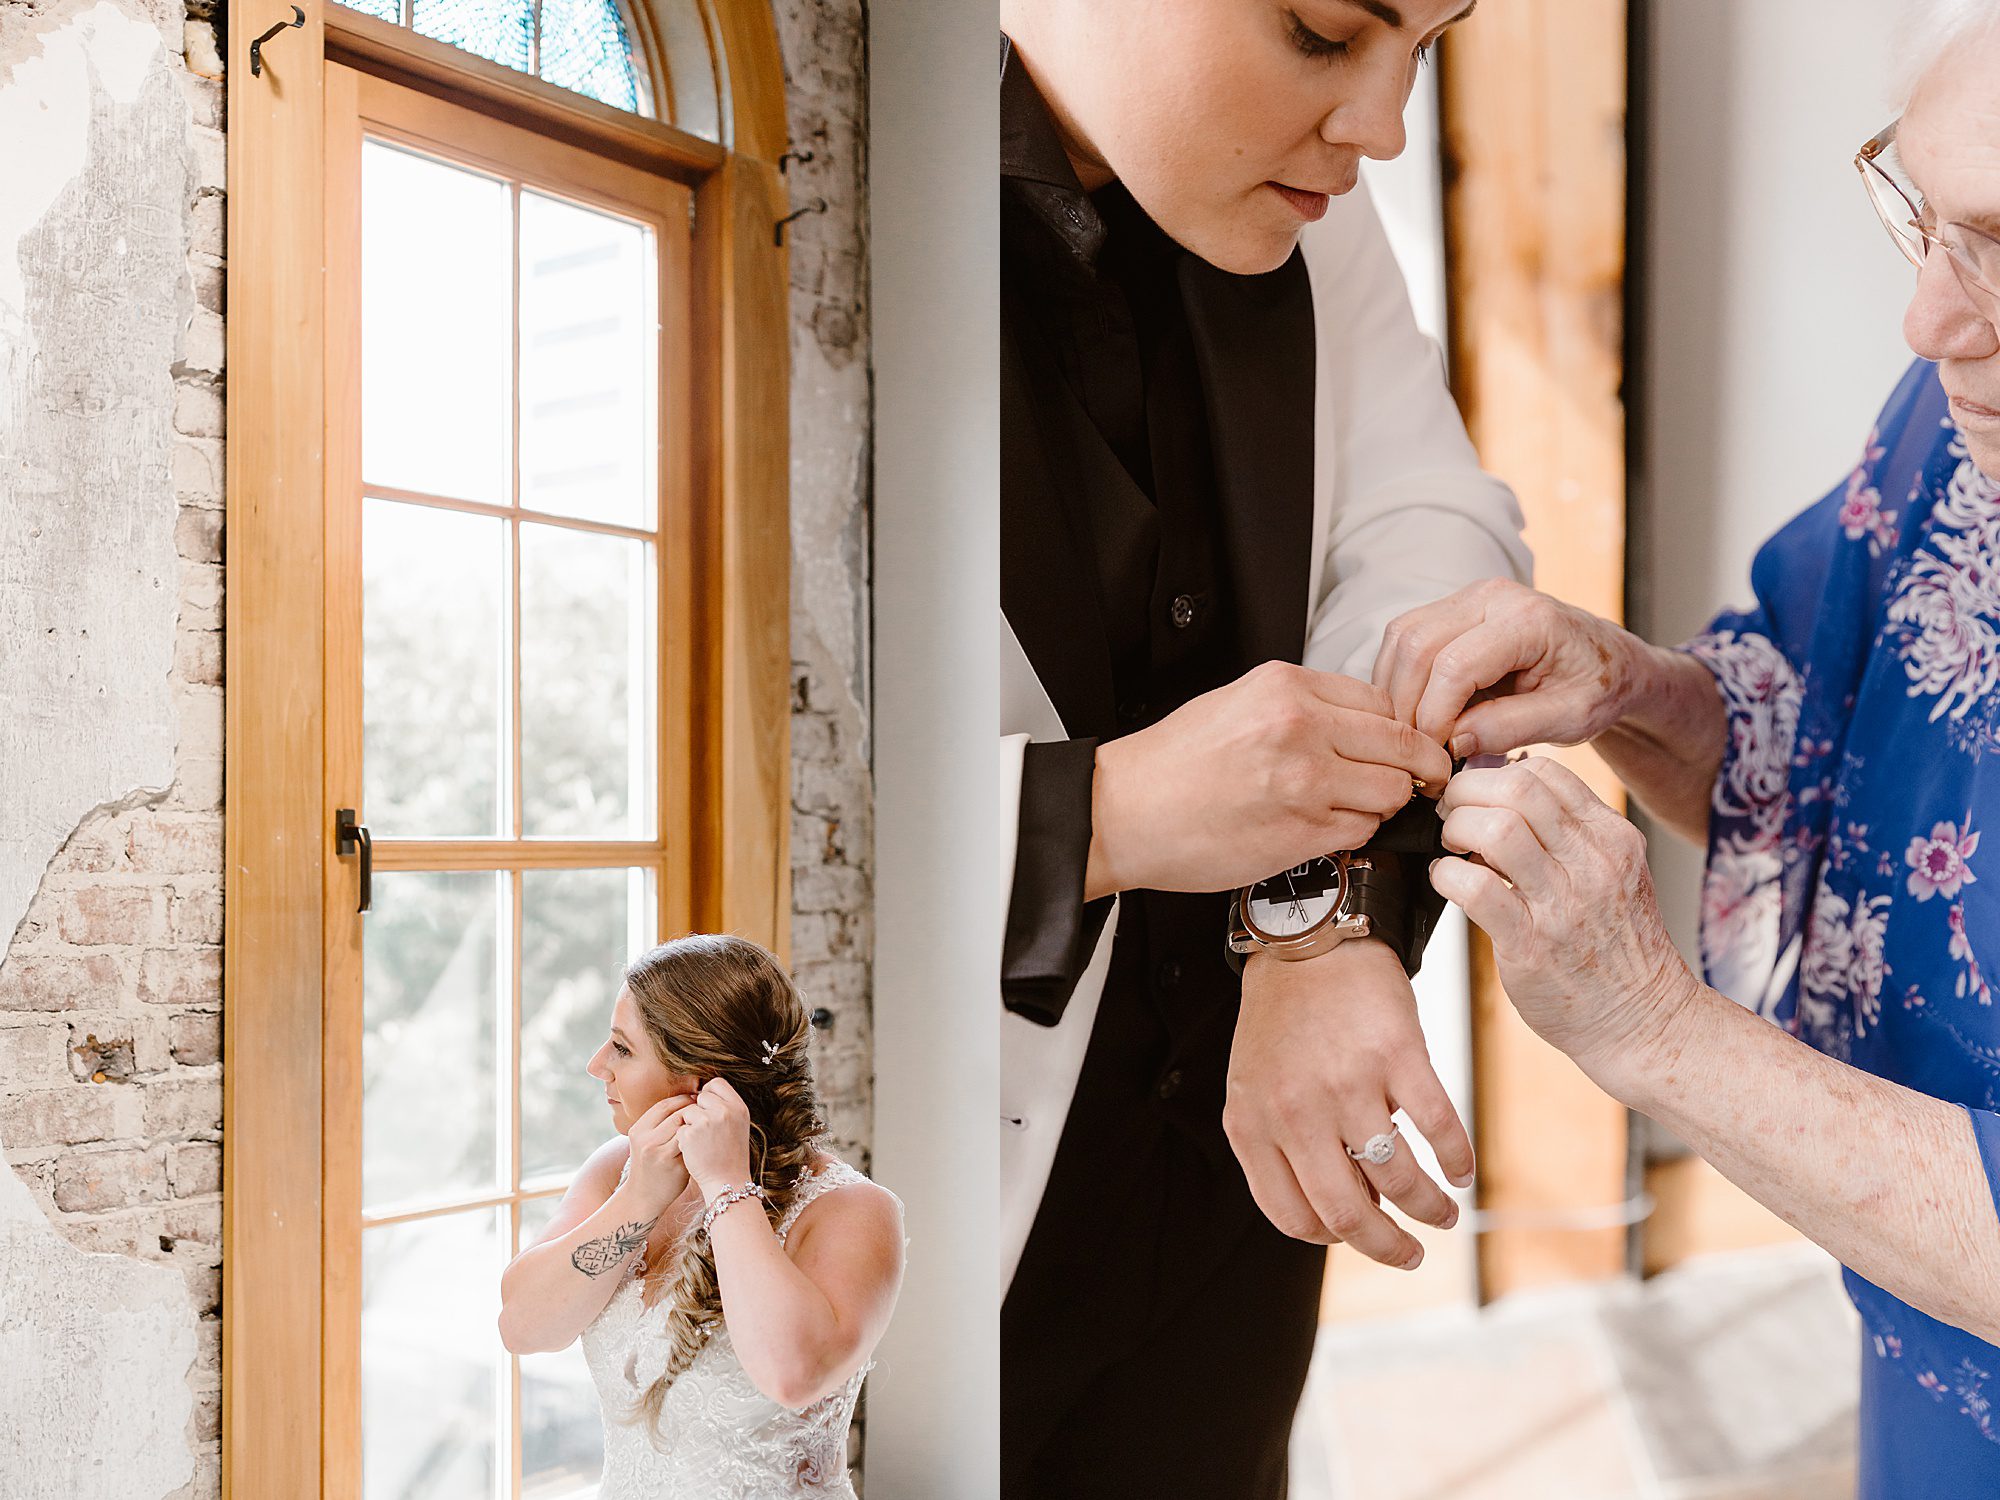 bride and bride get ready at wedding with putting on earrings and watch